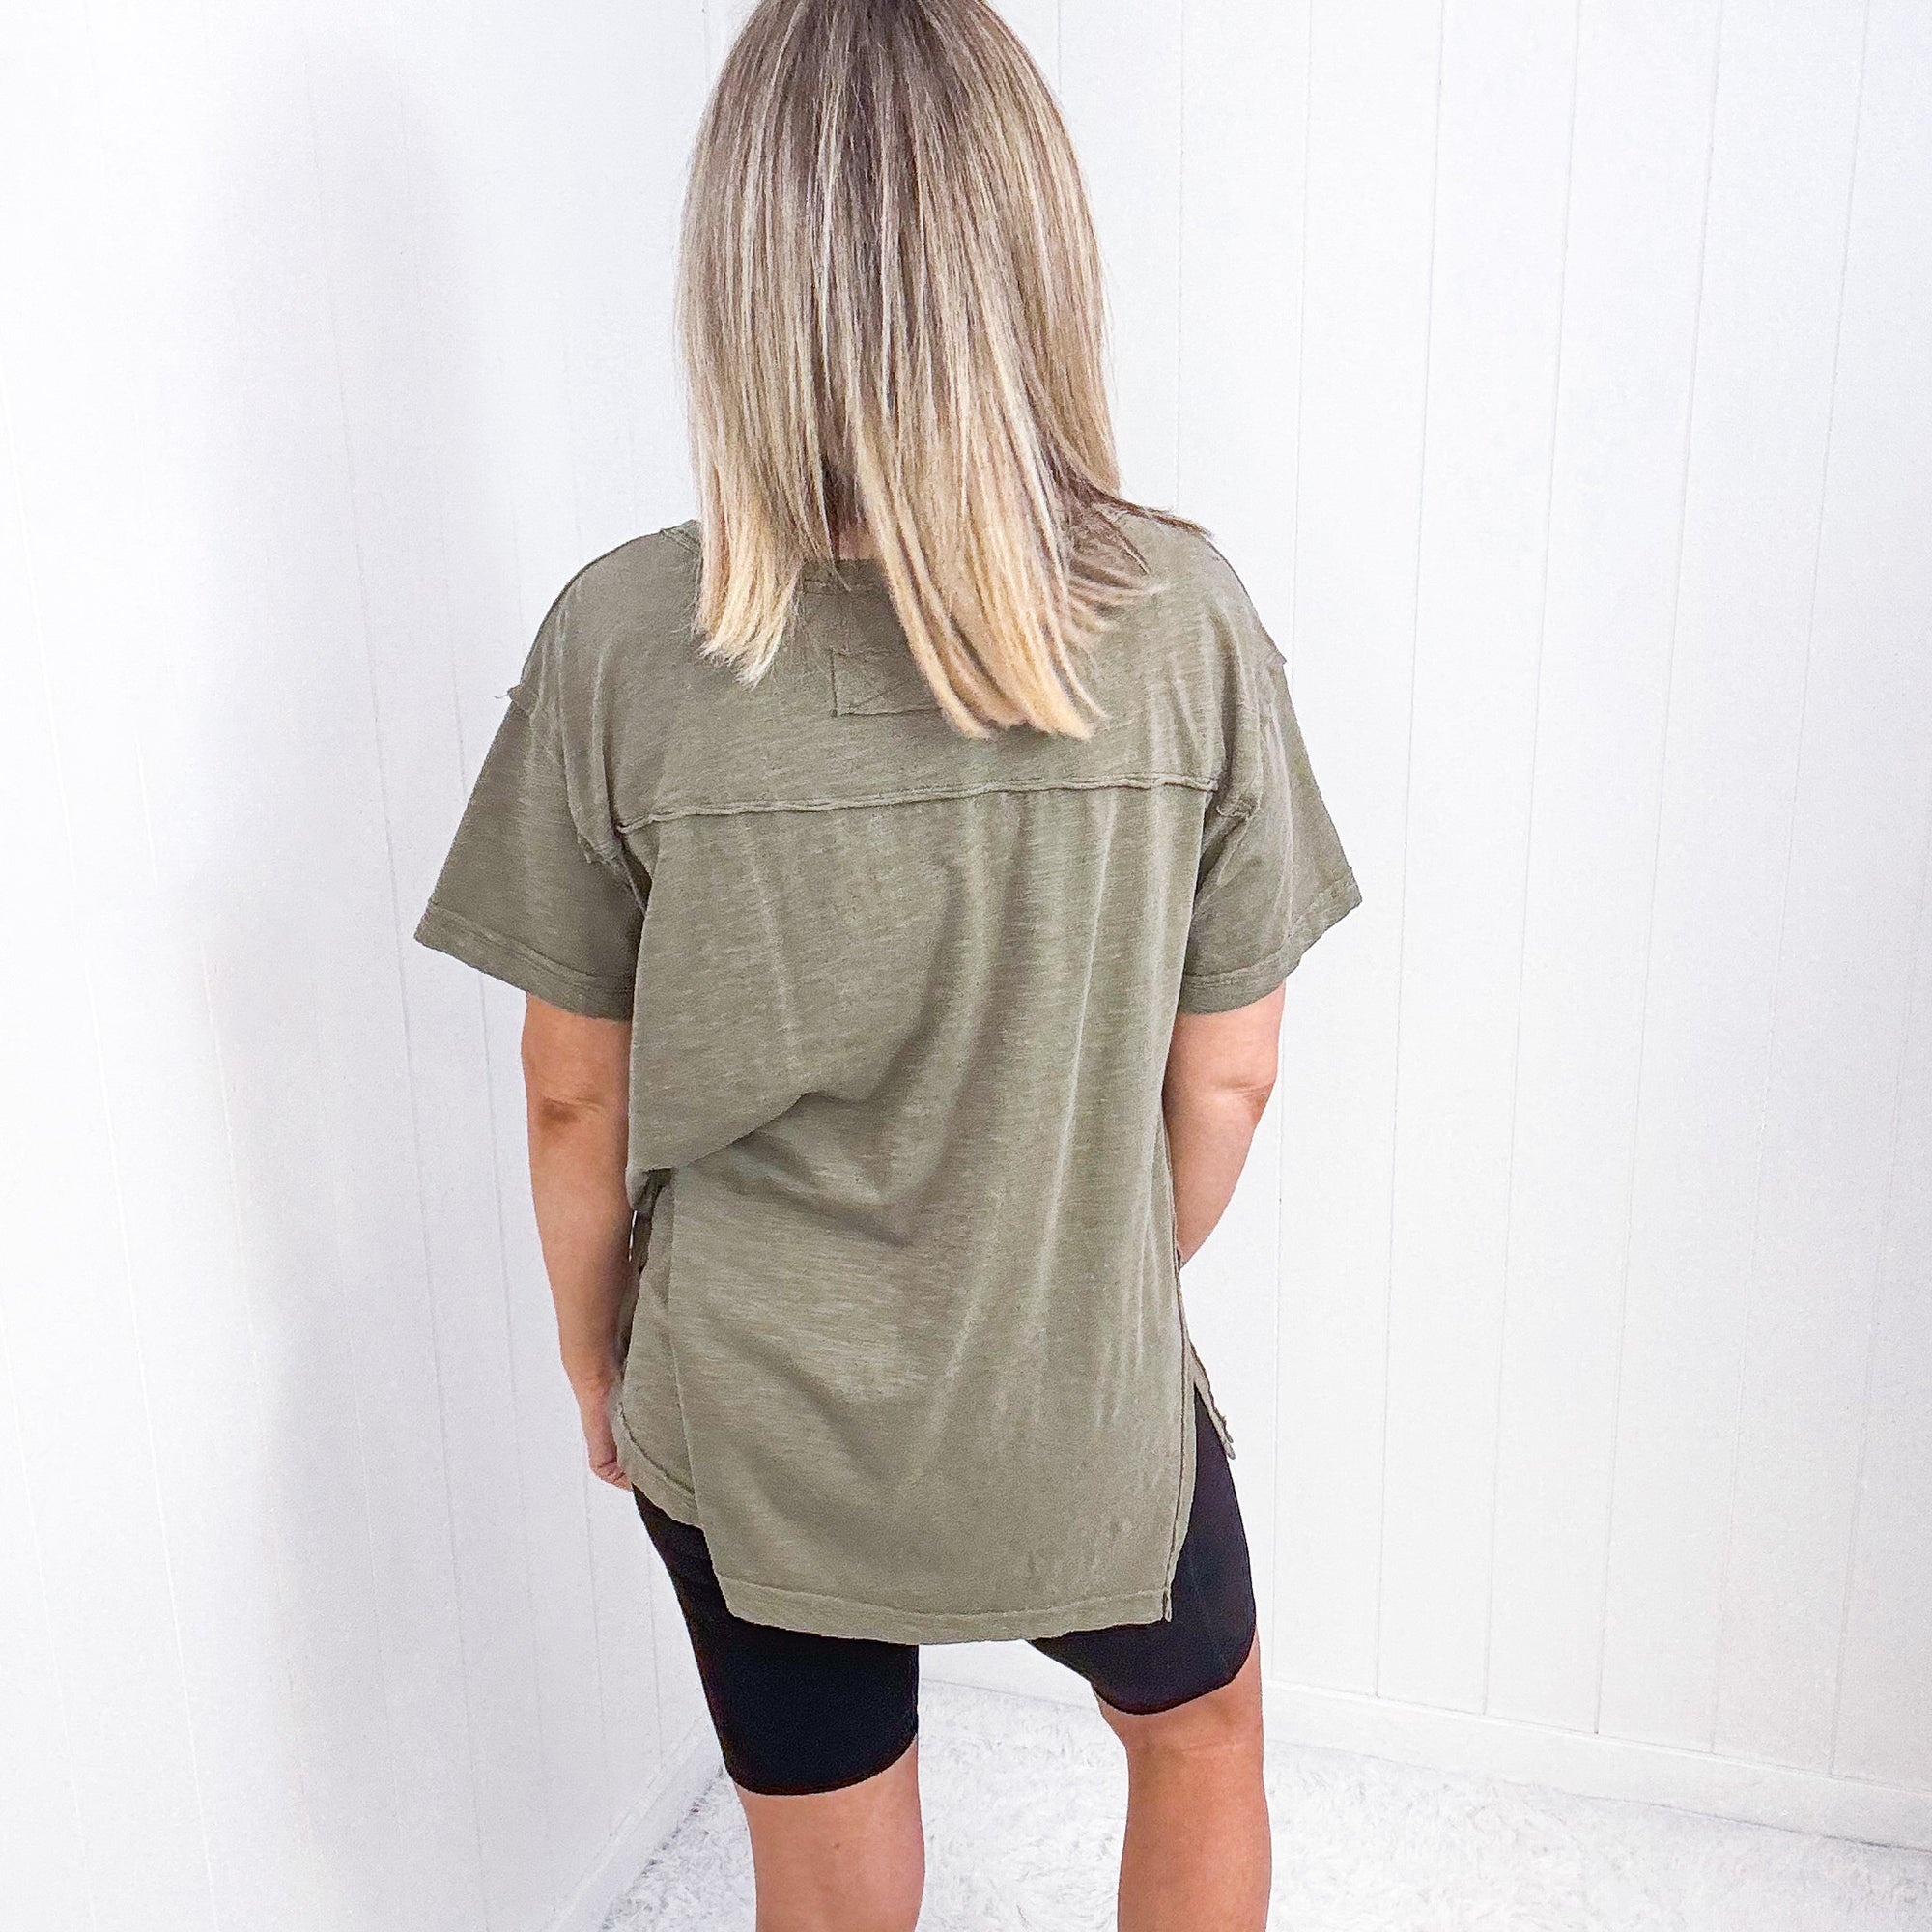 Washed Green Oversized Short Sleeve Tee - Boujee Boutique 